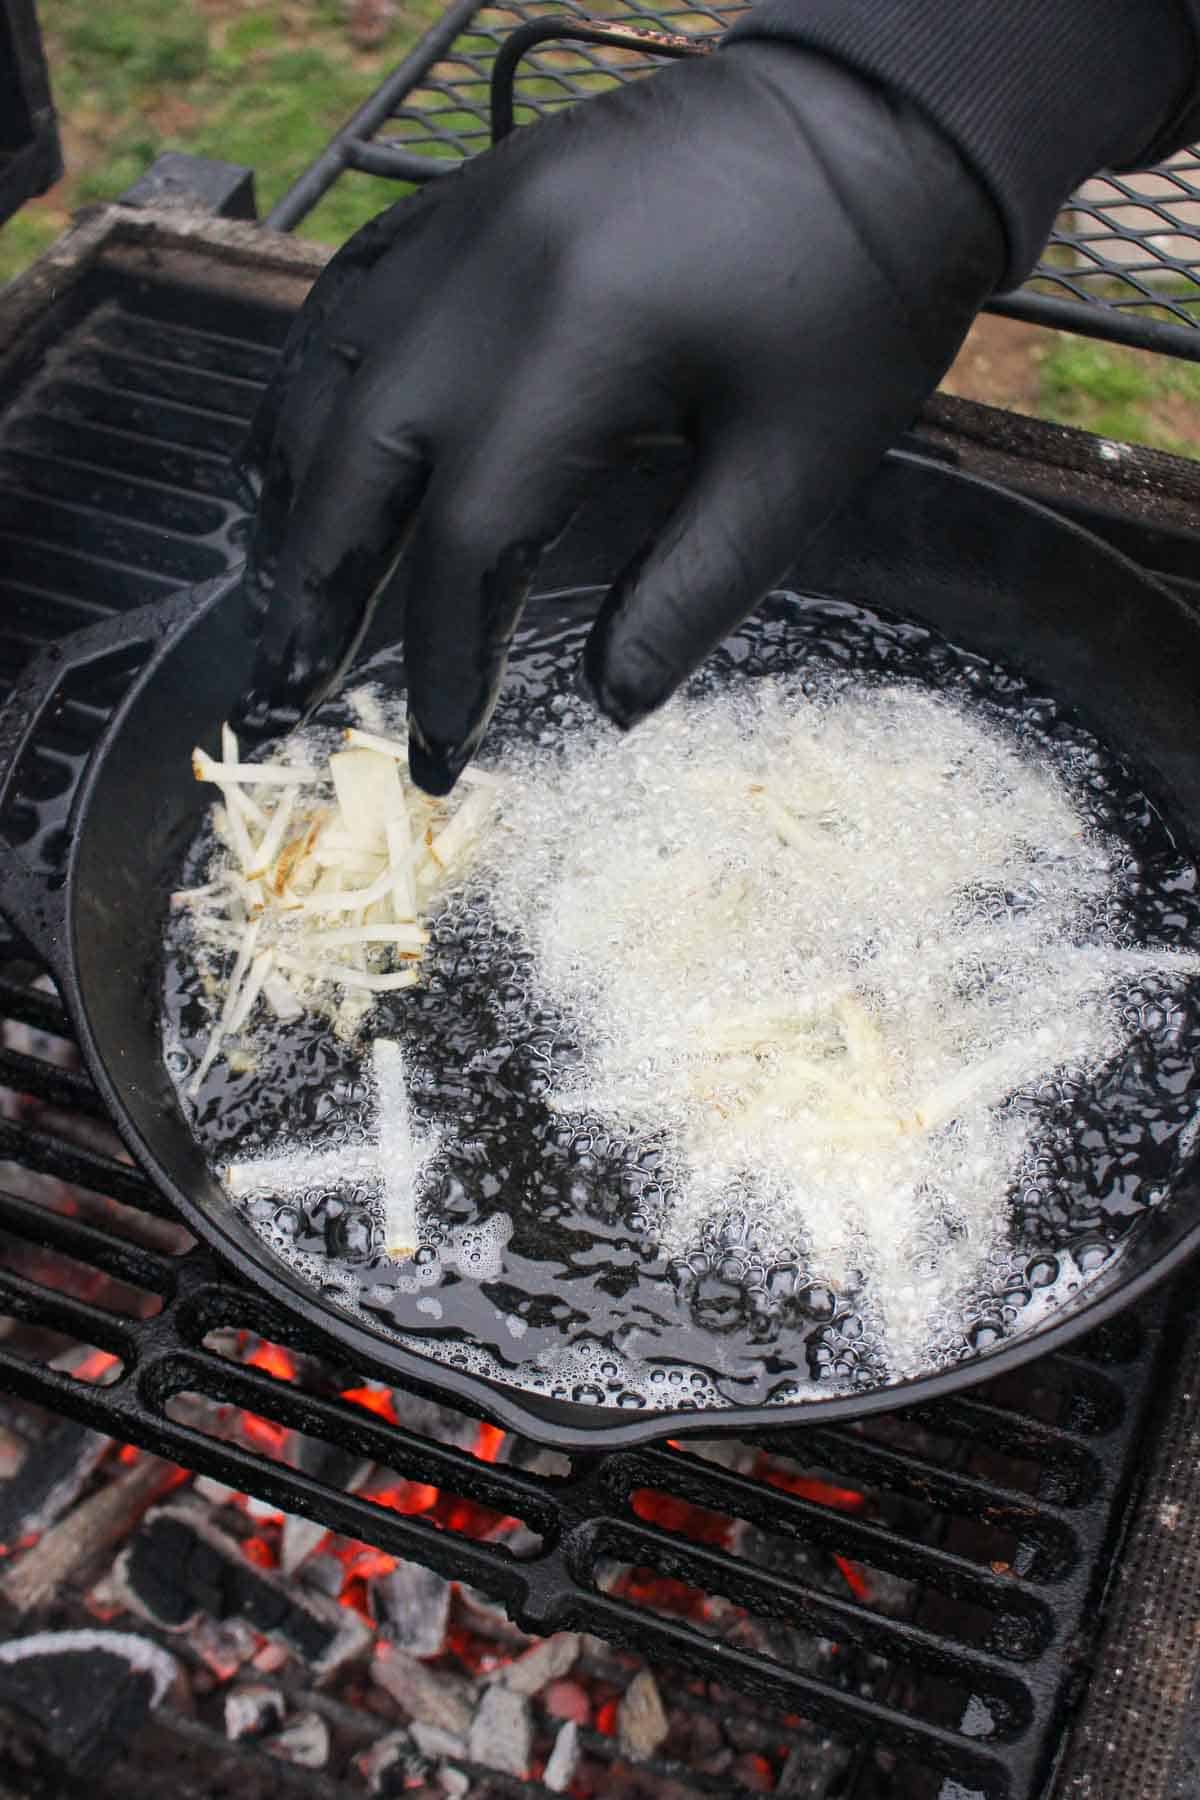 Adding the thinly sliced potato fries into the hot oil so they can fry.